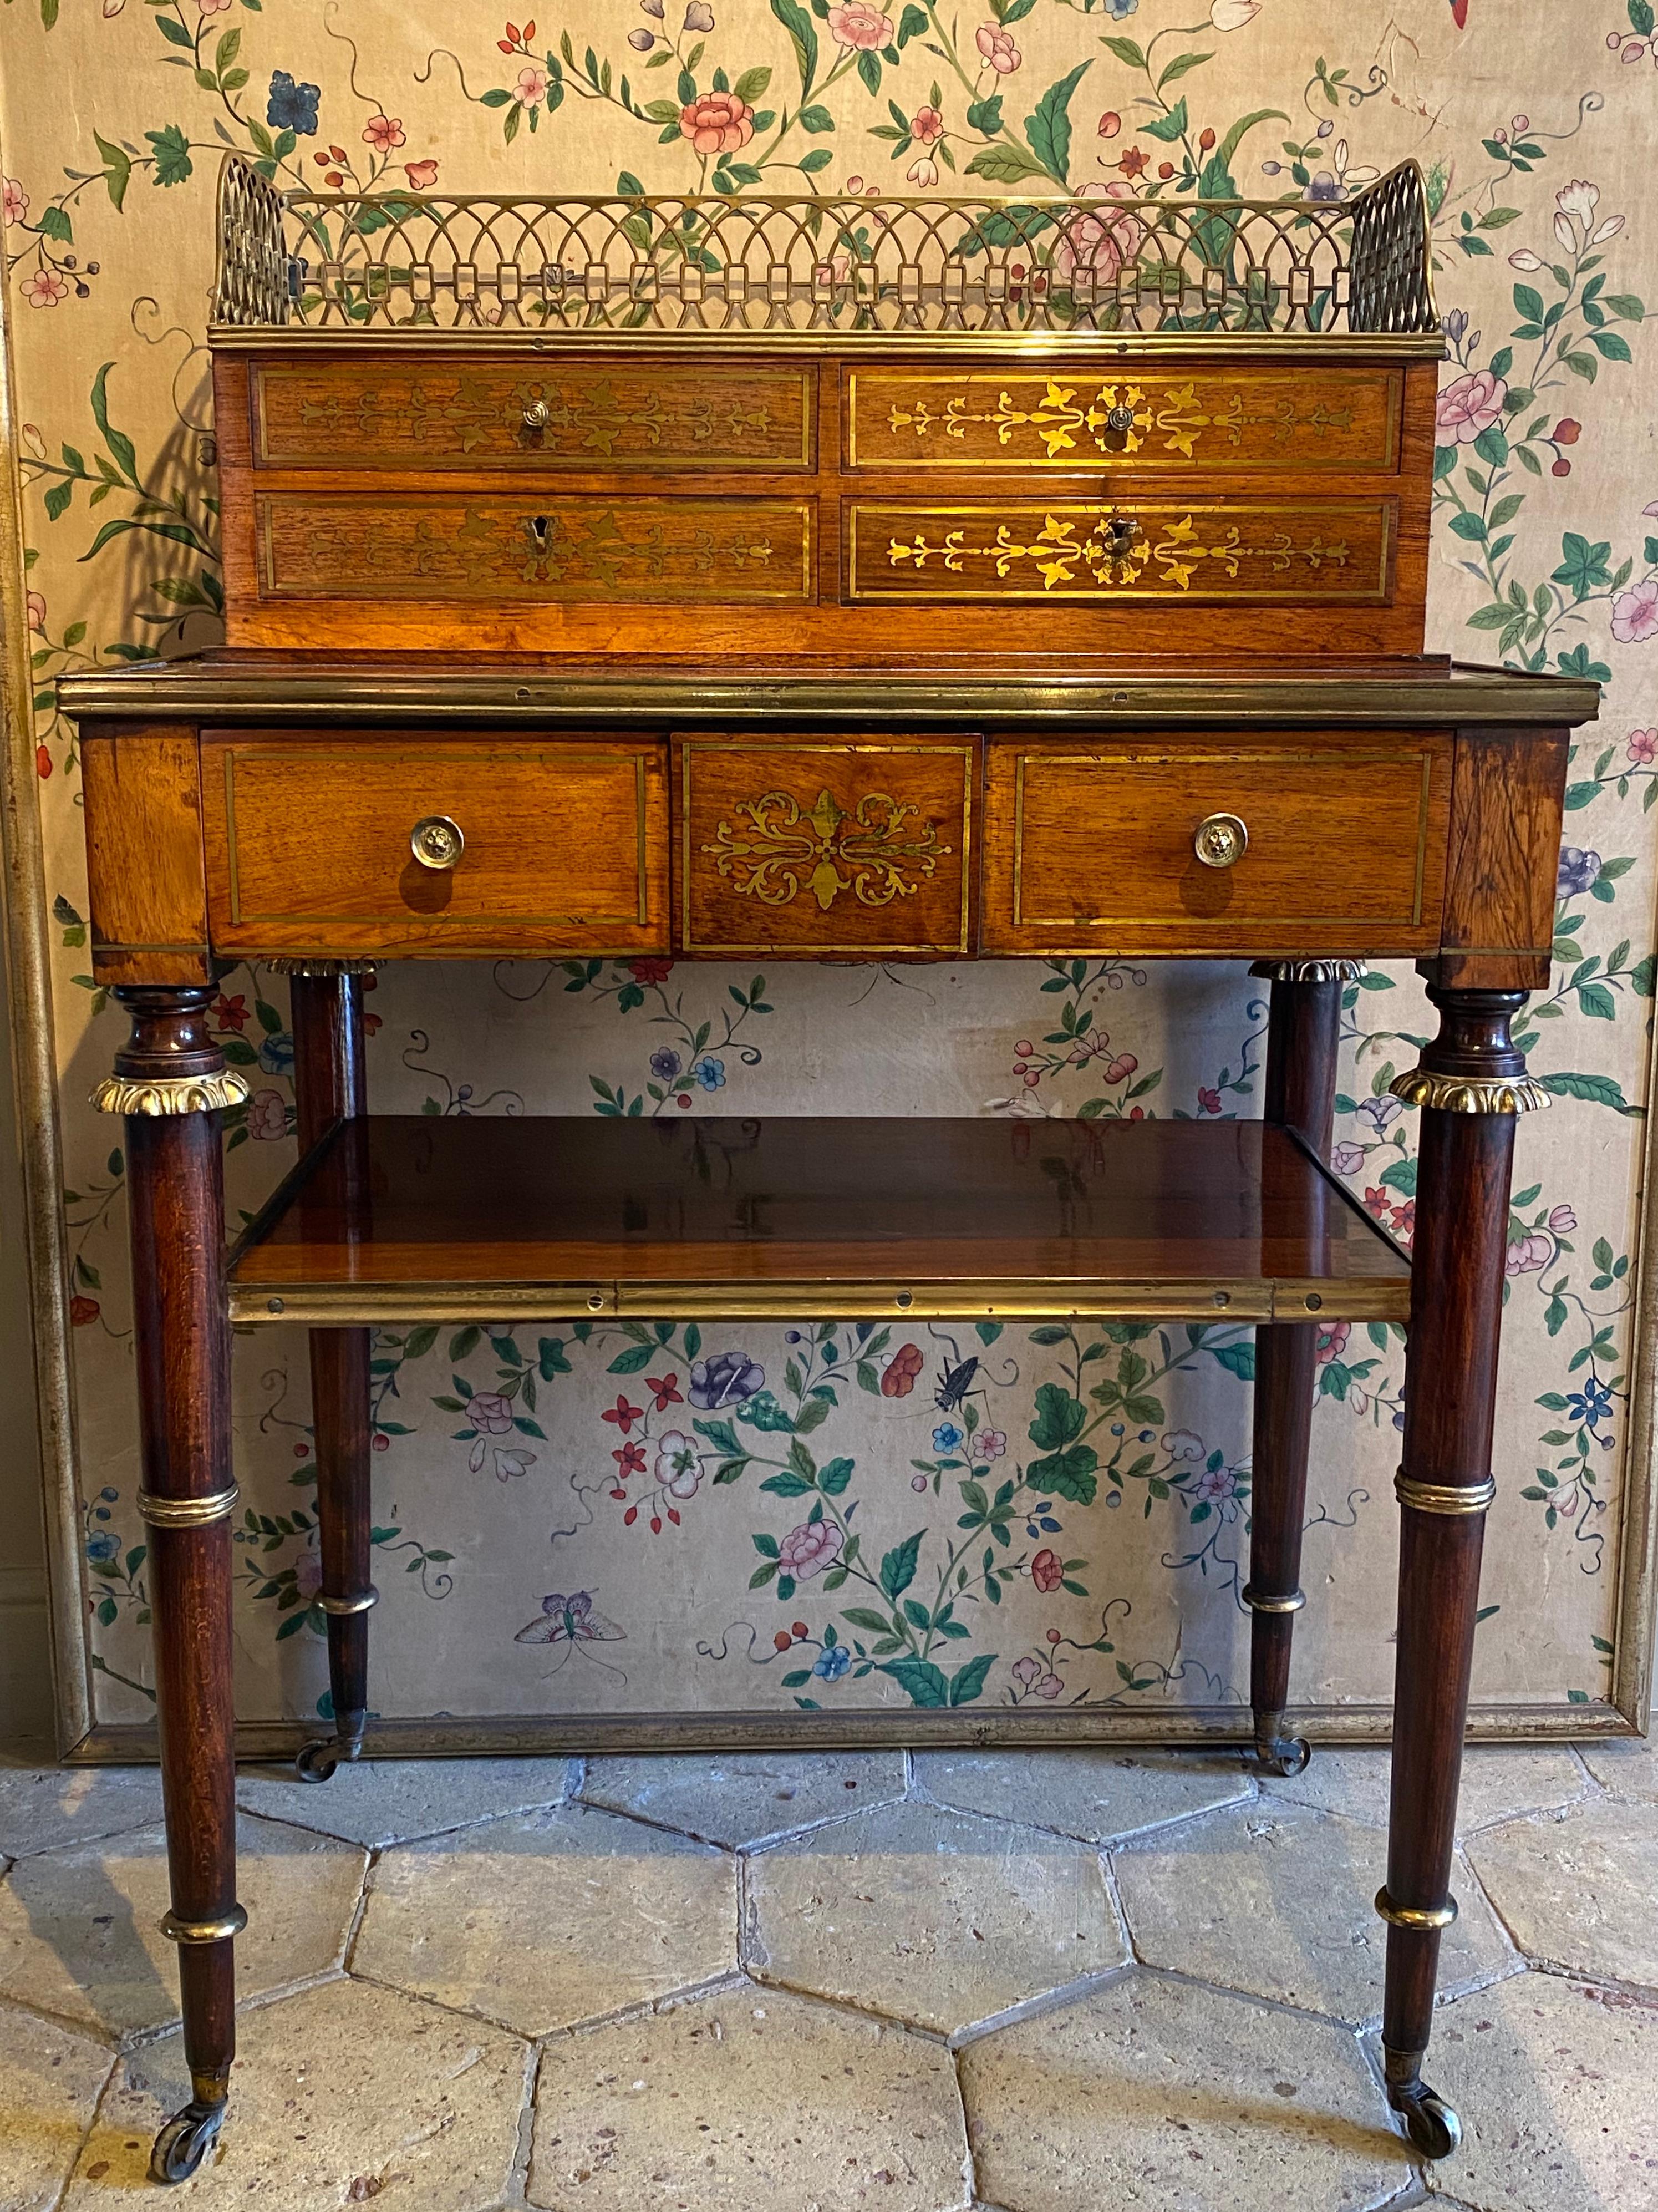 An exceptional English Regency-period bonheur du jour attributed to John Maclean, ca 1810.

A Fine early 19th century rosewood and brass-inlaid bonheur du jour or writing desk, of the highest quality.

Of lovely color and patina. In superb